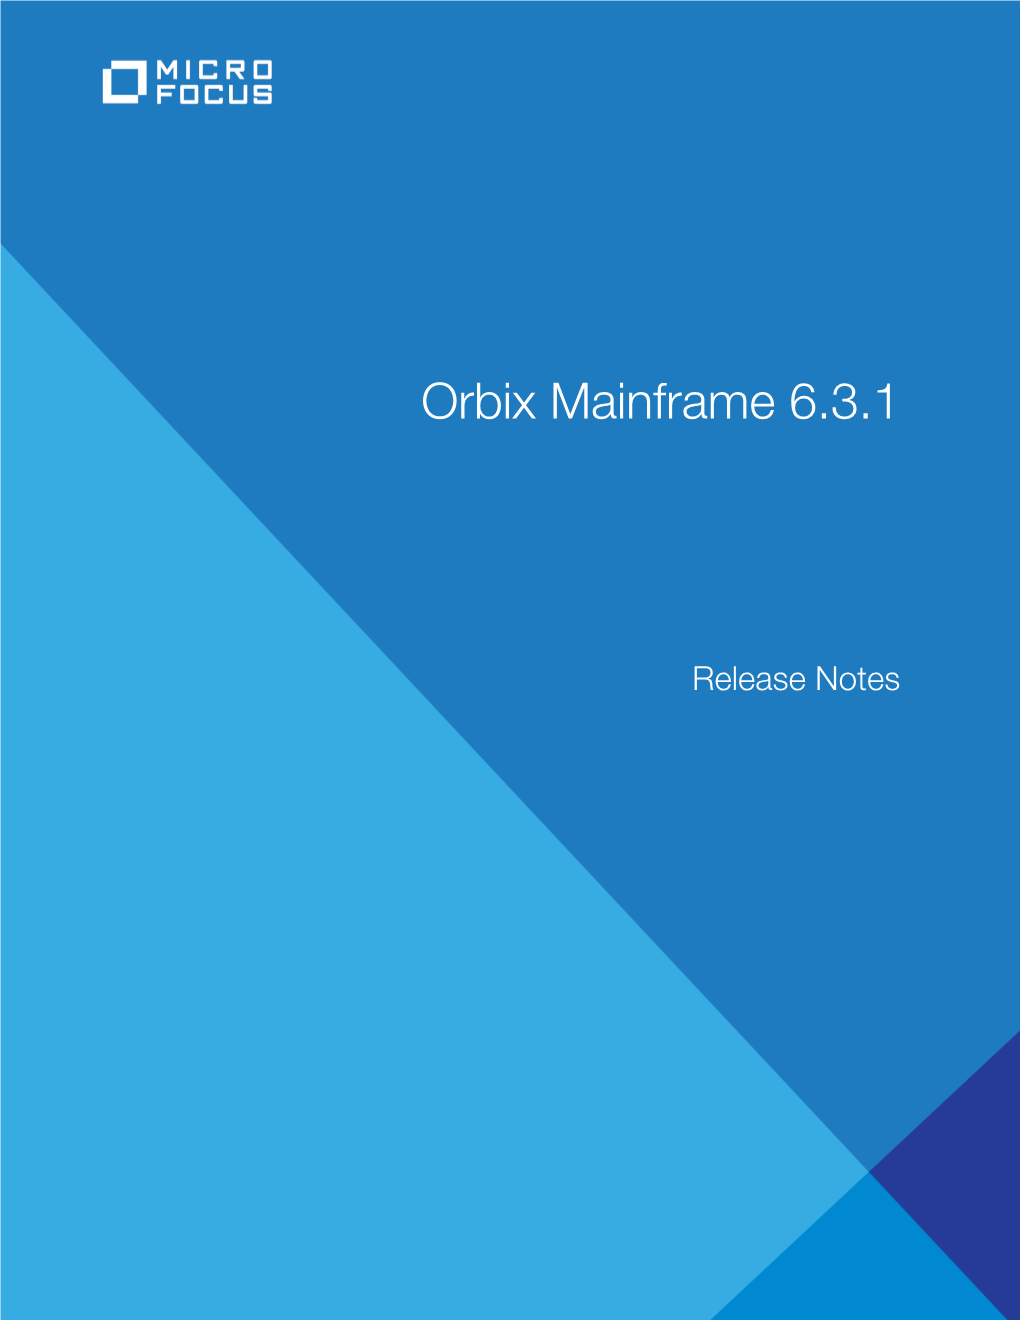 Orbix Mainframe Release Notes